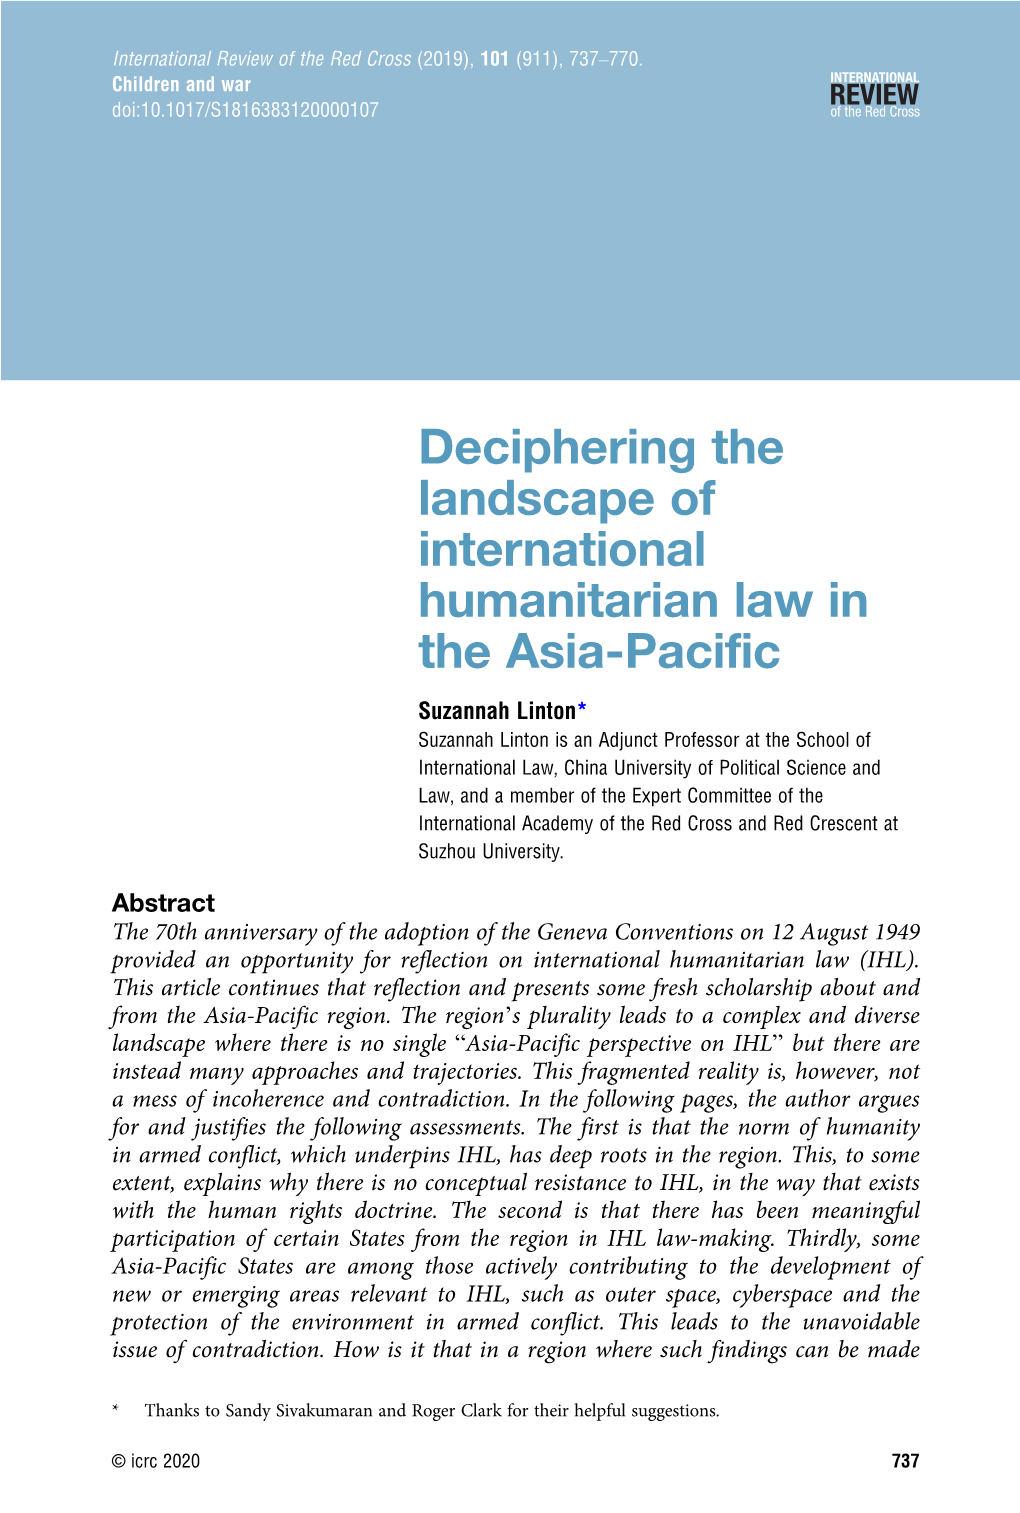 Deciphering the Landscape of International Humanitarian Law In